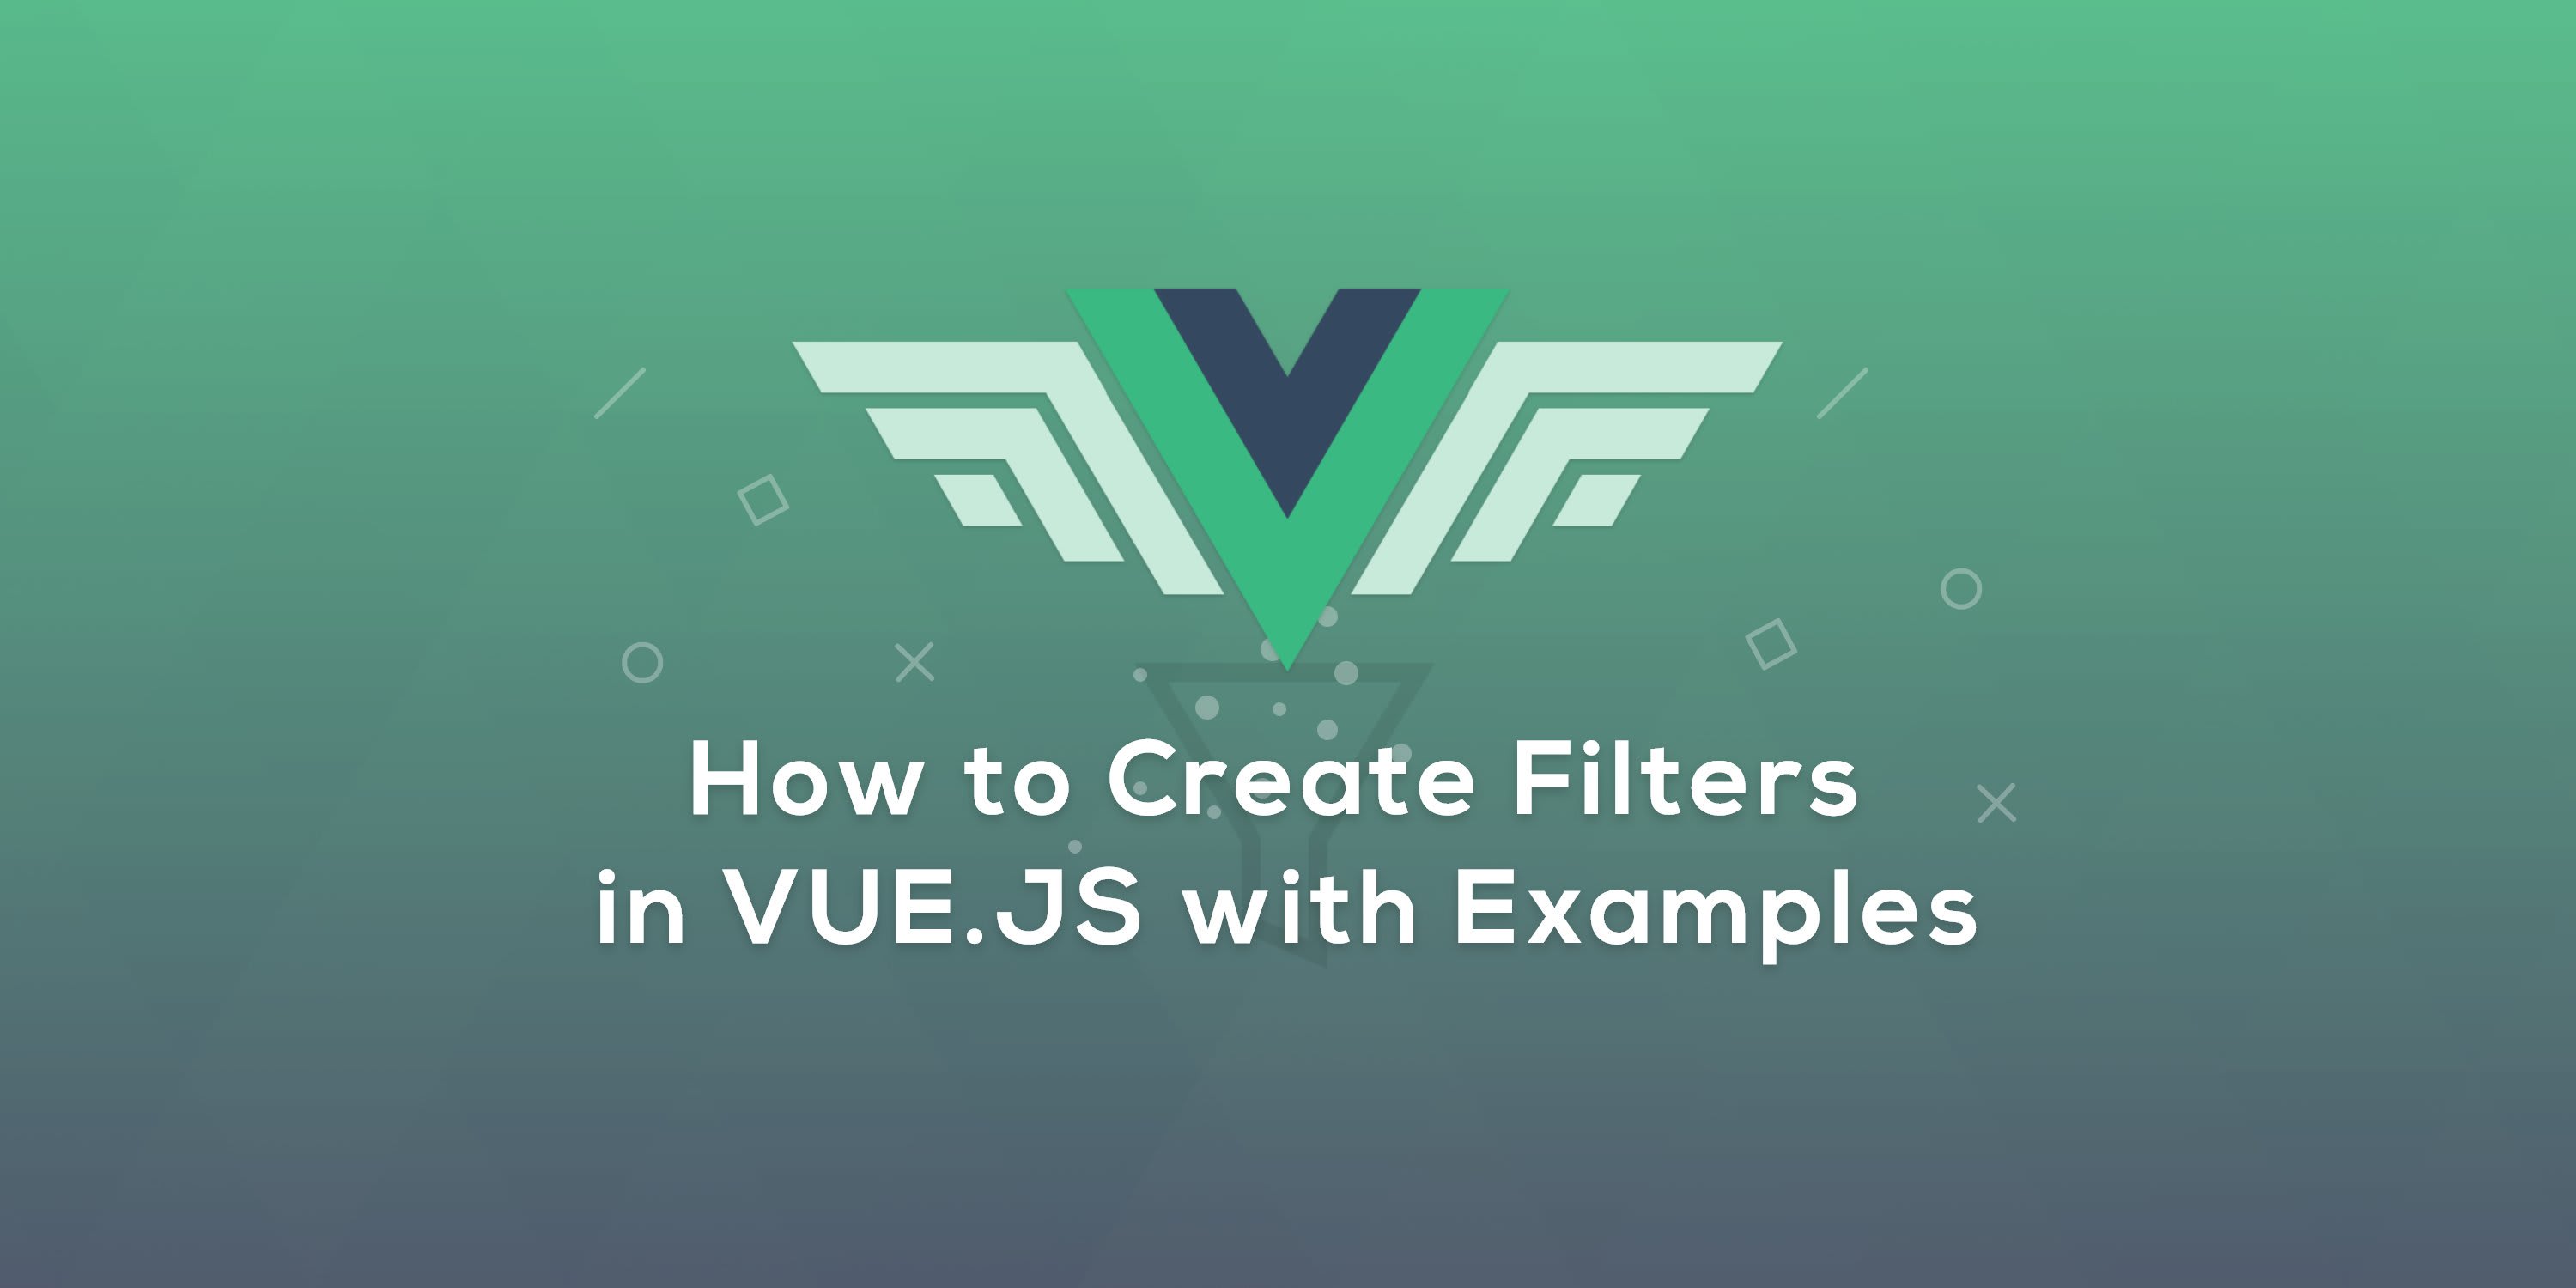 How to Create Filters in Vue.js with Examples